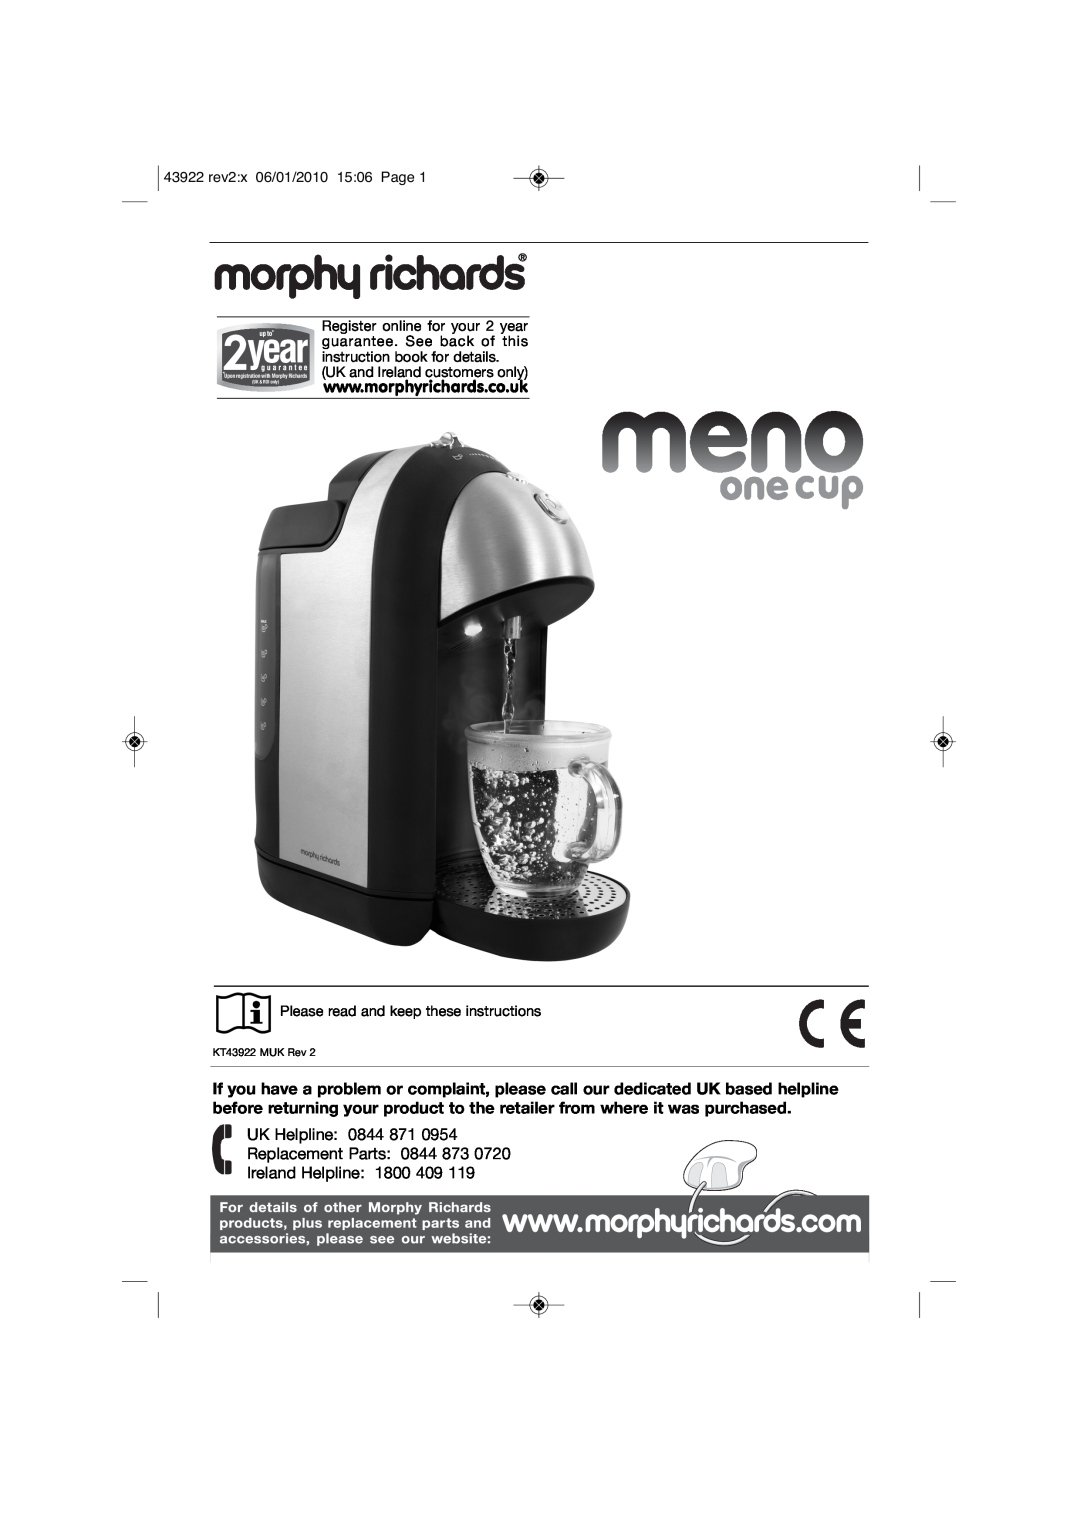 Morphy Richards KT43922 manual Please read and keep these instructions, UK Helpline 0844 871 Replacement Parts 0844 